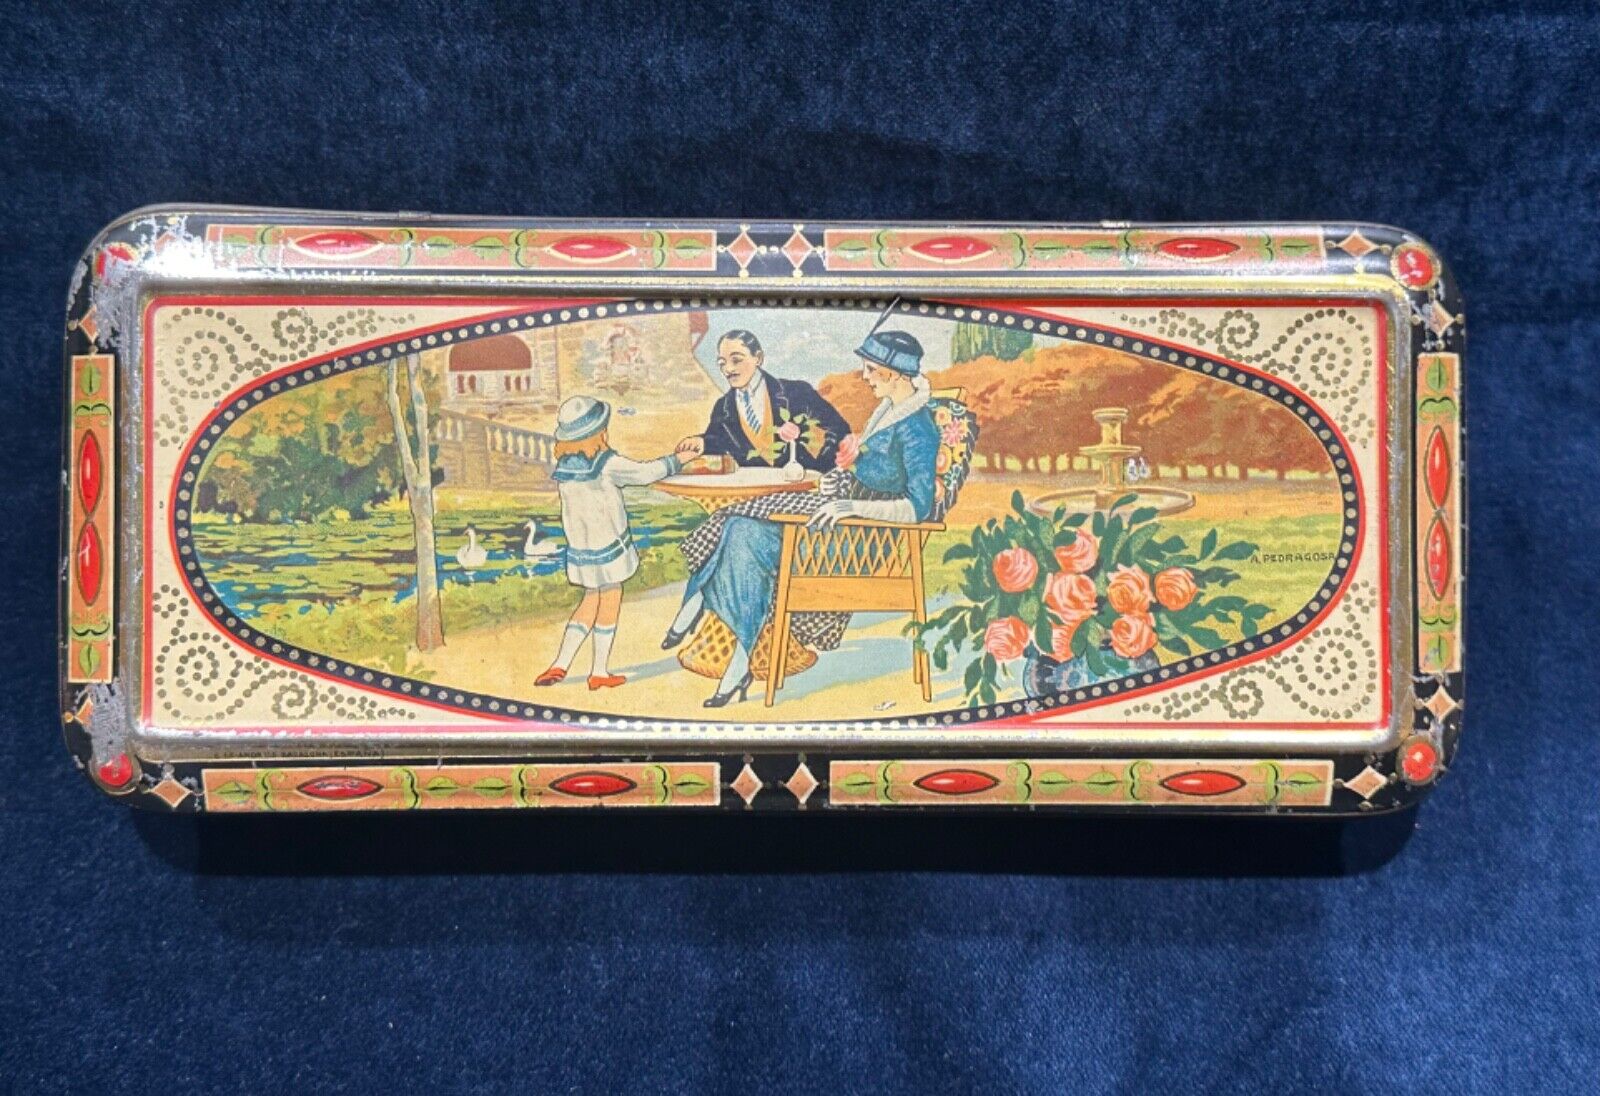 Antique Exquis Chocolate La Suisse, A Rene, Illustrated by A Pedragosa Litho Tin